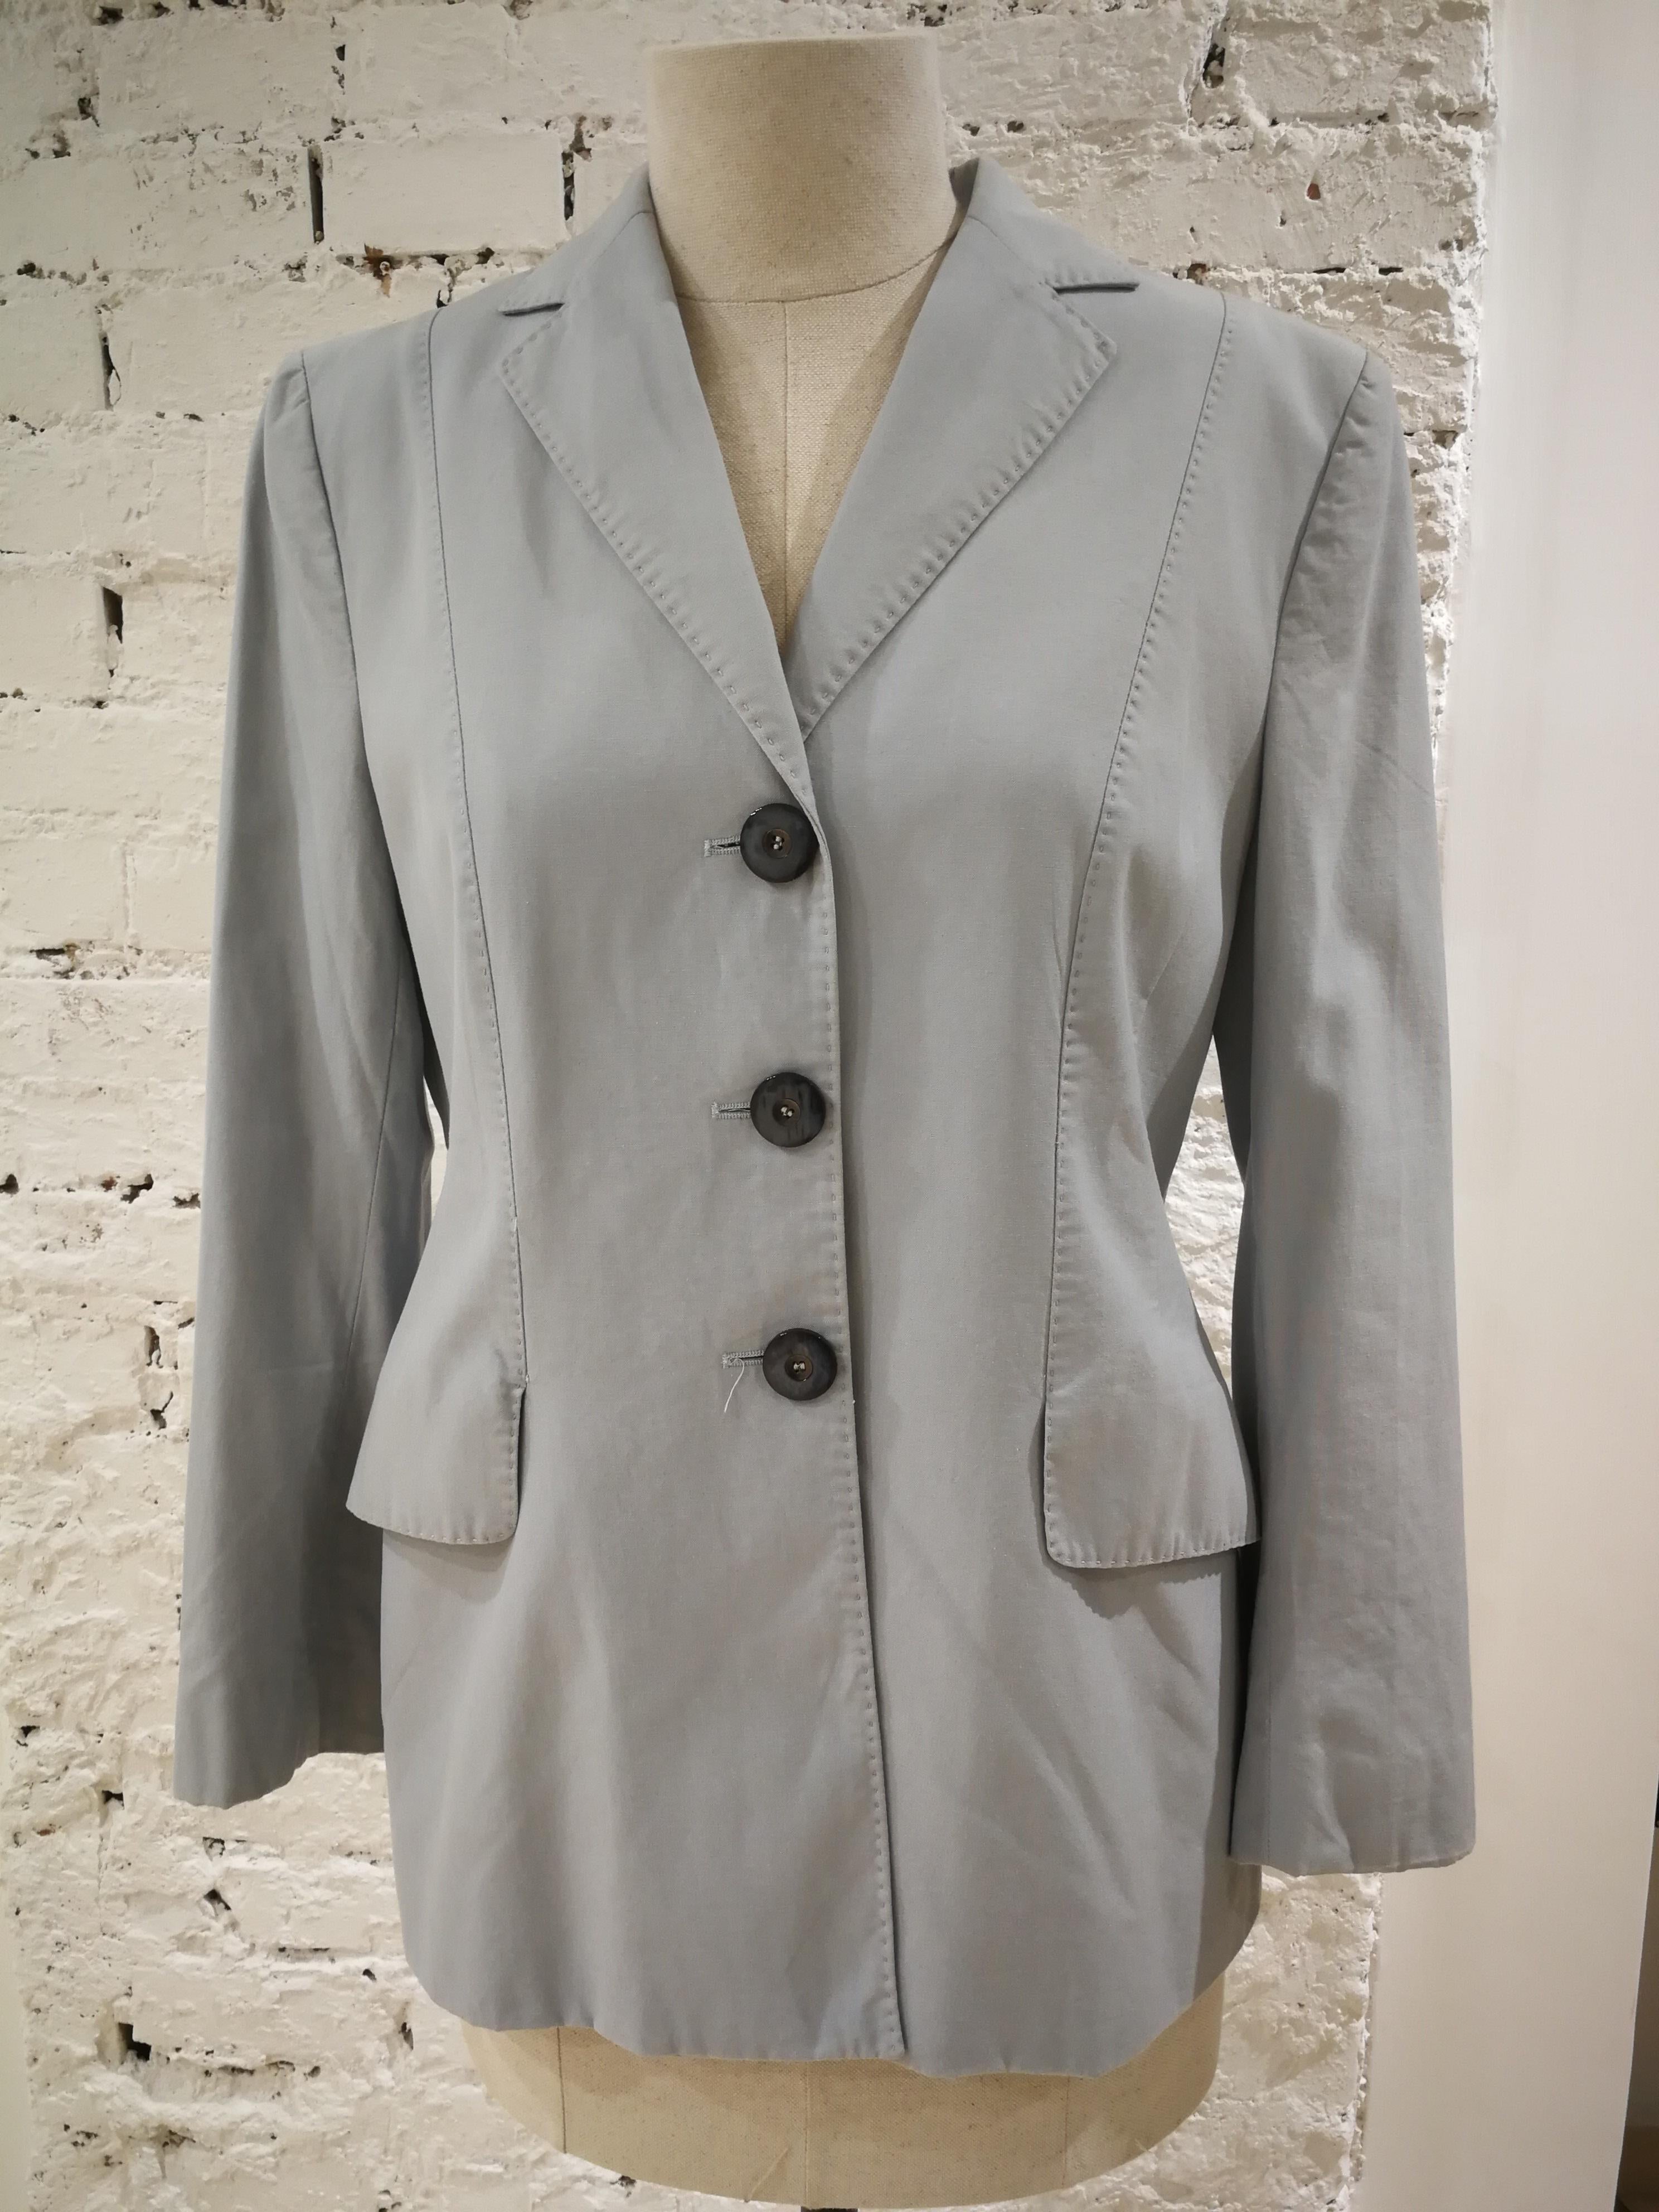 Moschino Light Blue Jacket
totally made in italy n size 44
composition: Cotton and rayon